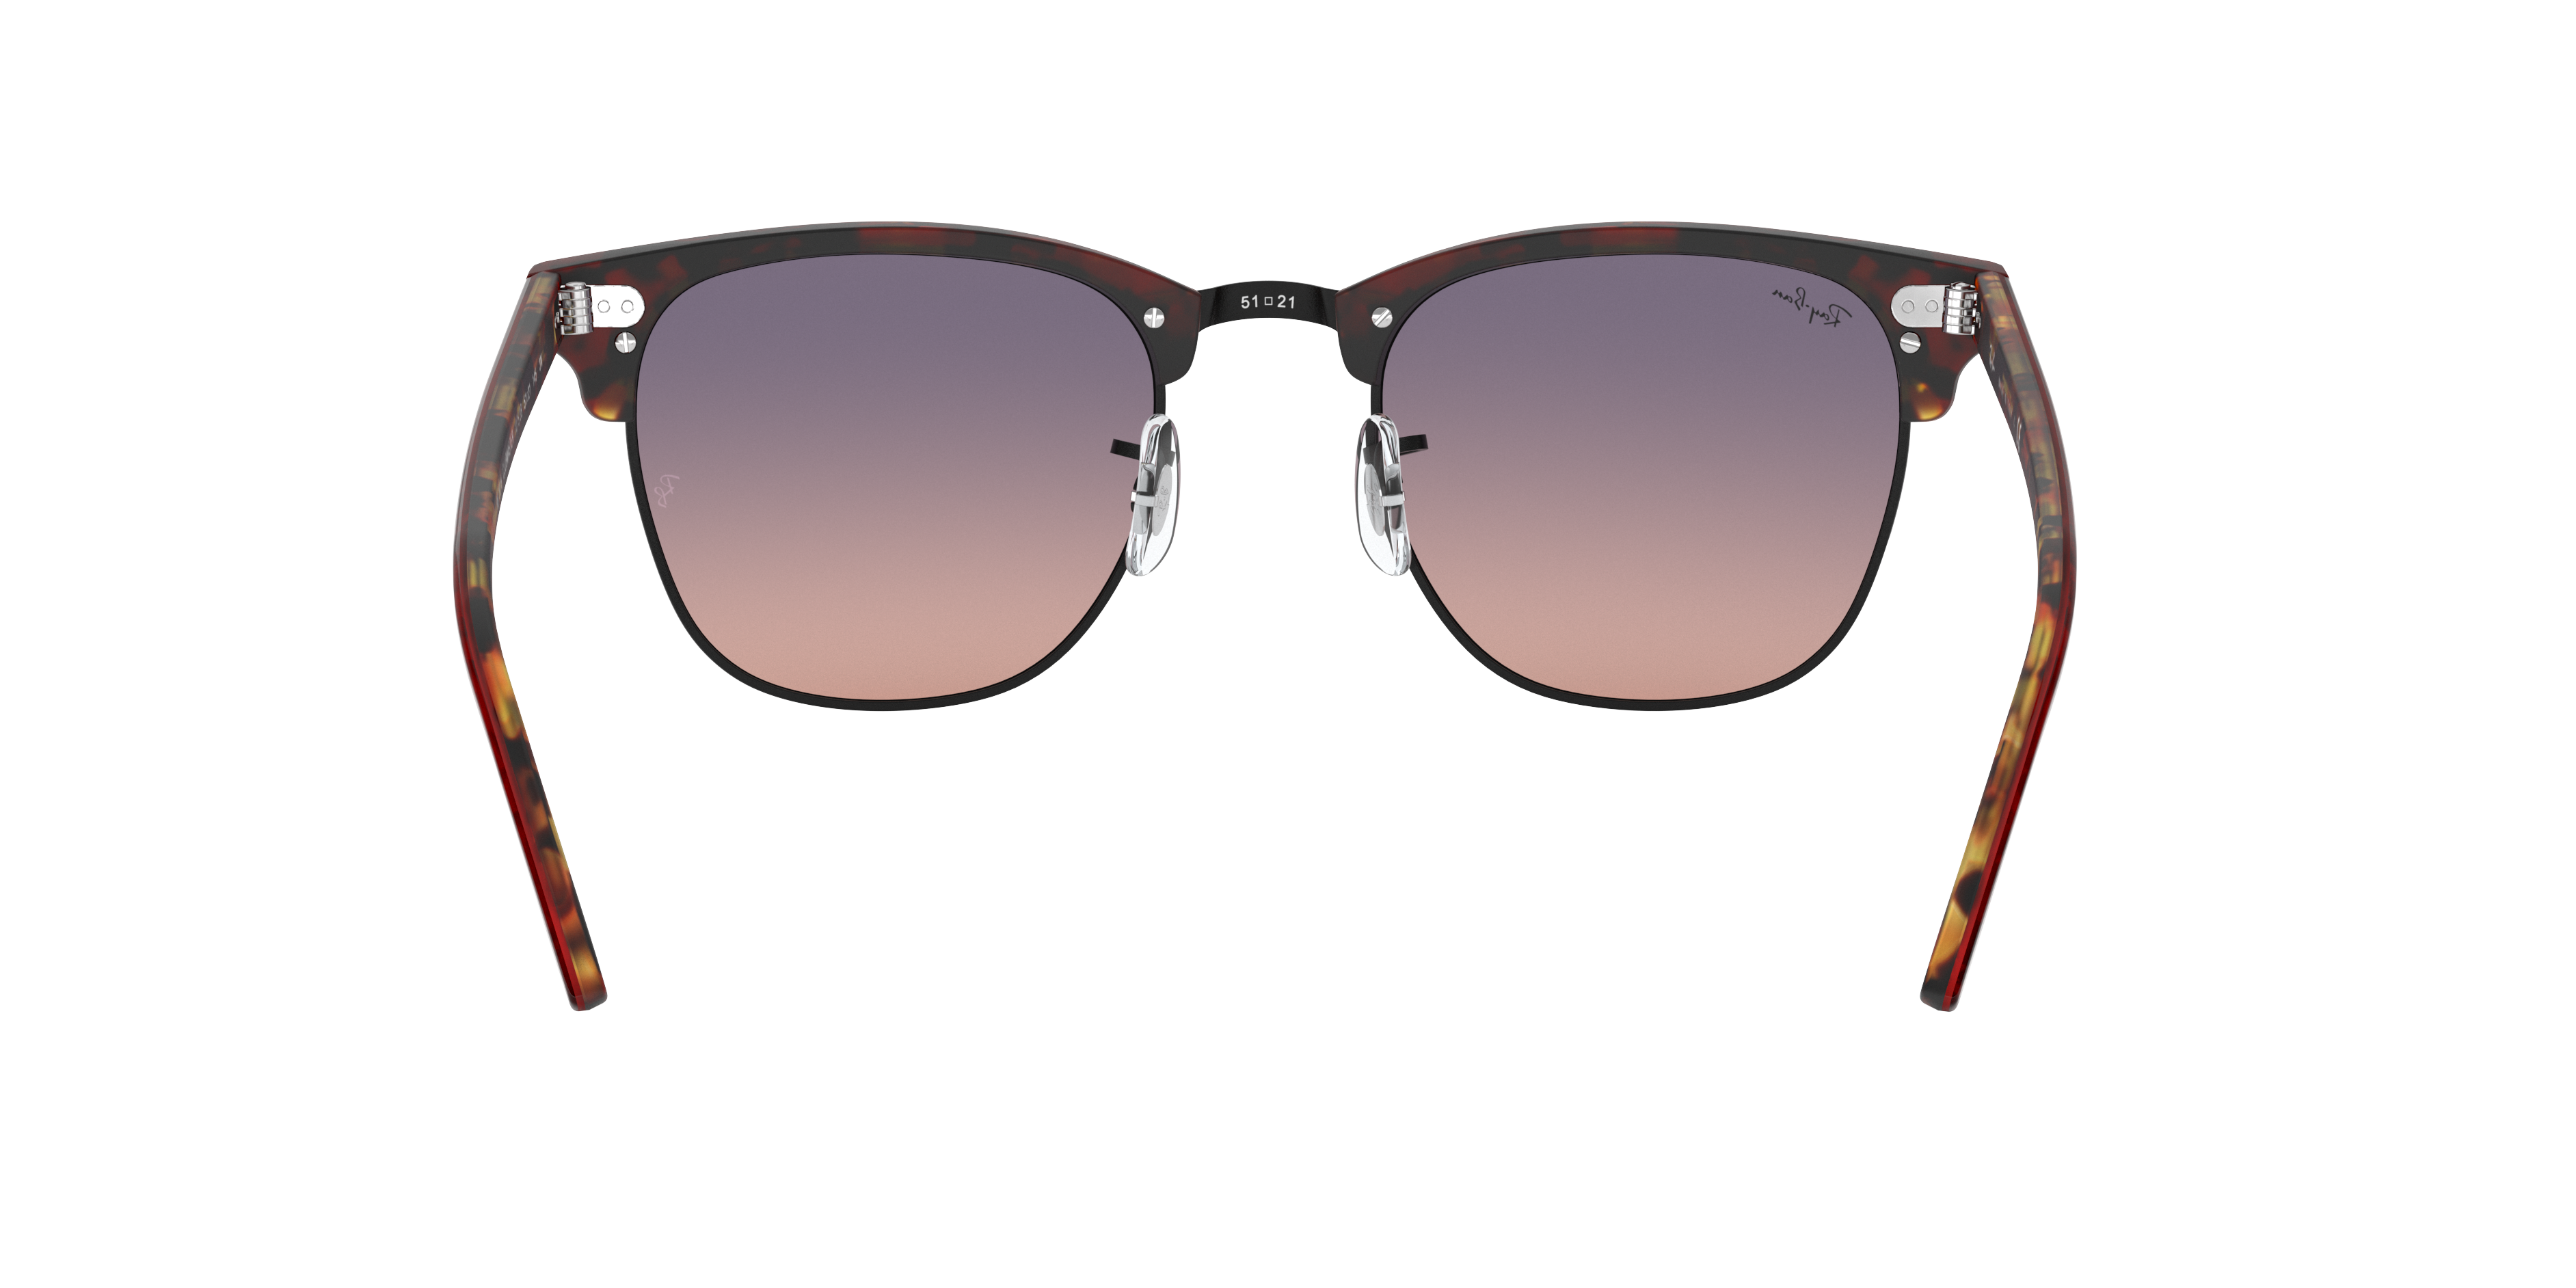 [products.image.detail02] Ray-Ban Clubmaster Color Mix RB3016 12753B